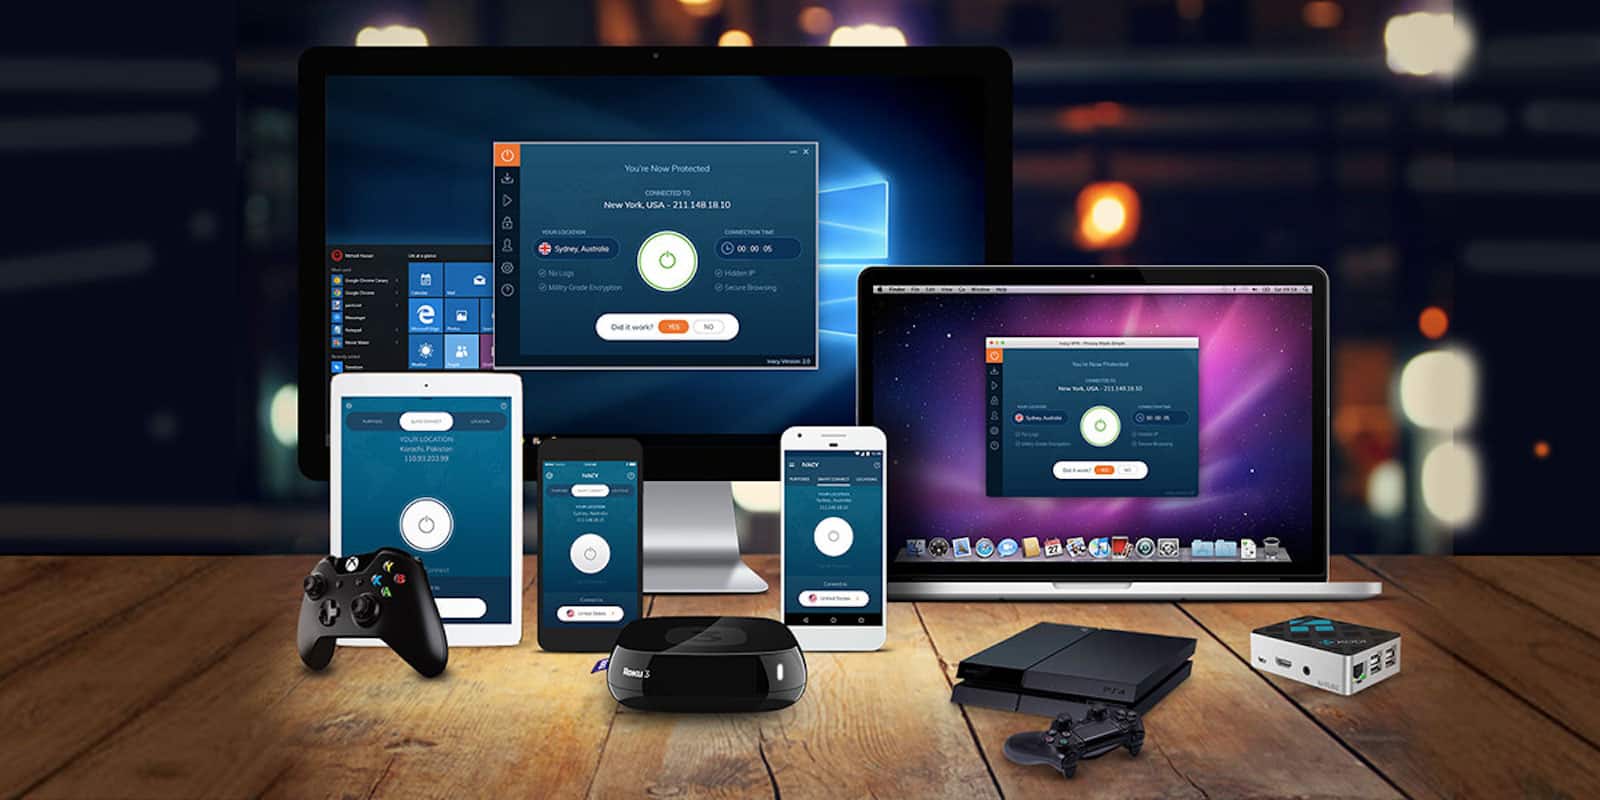 Get a lifetime of comprehensive VPN protection, along with some other goodies.